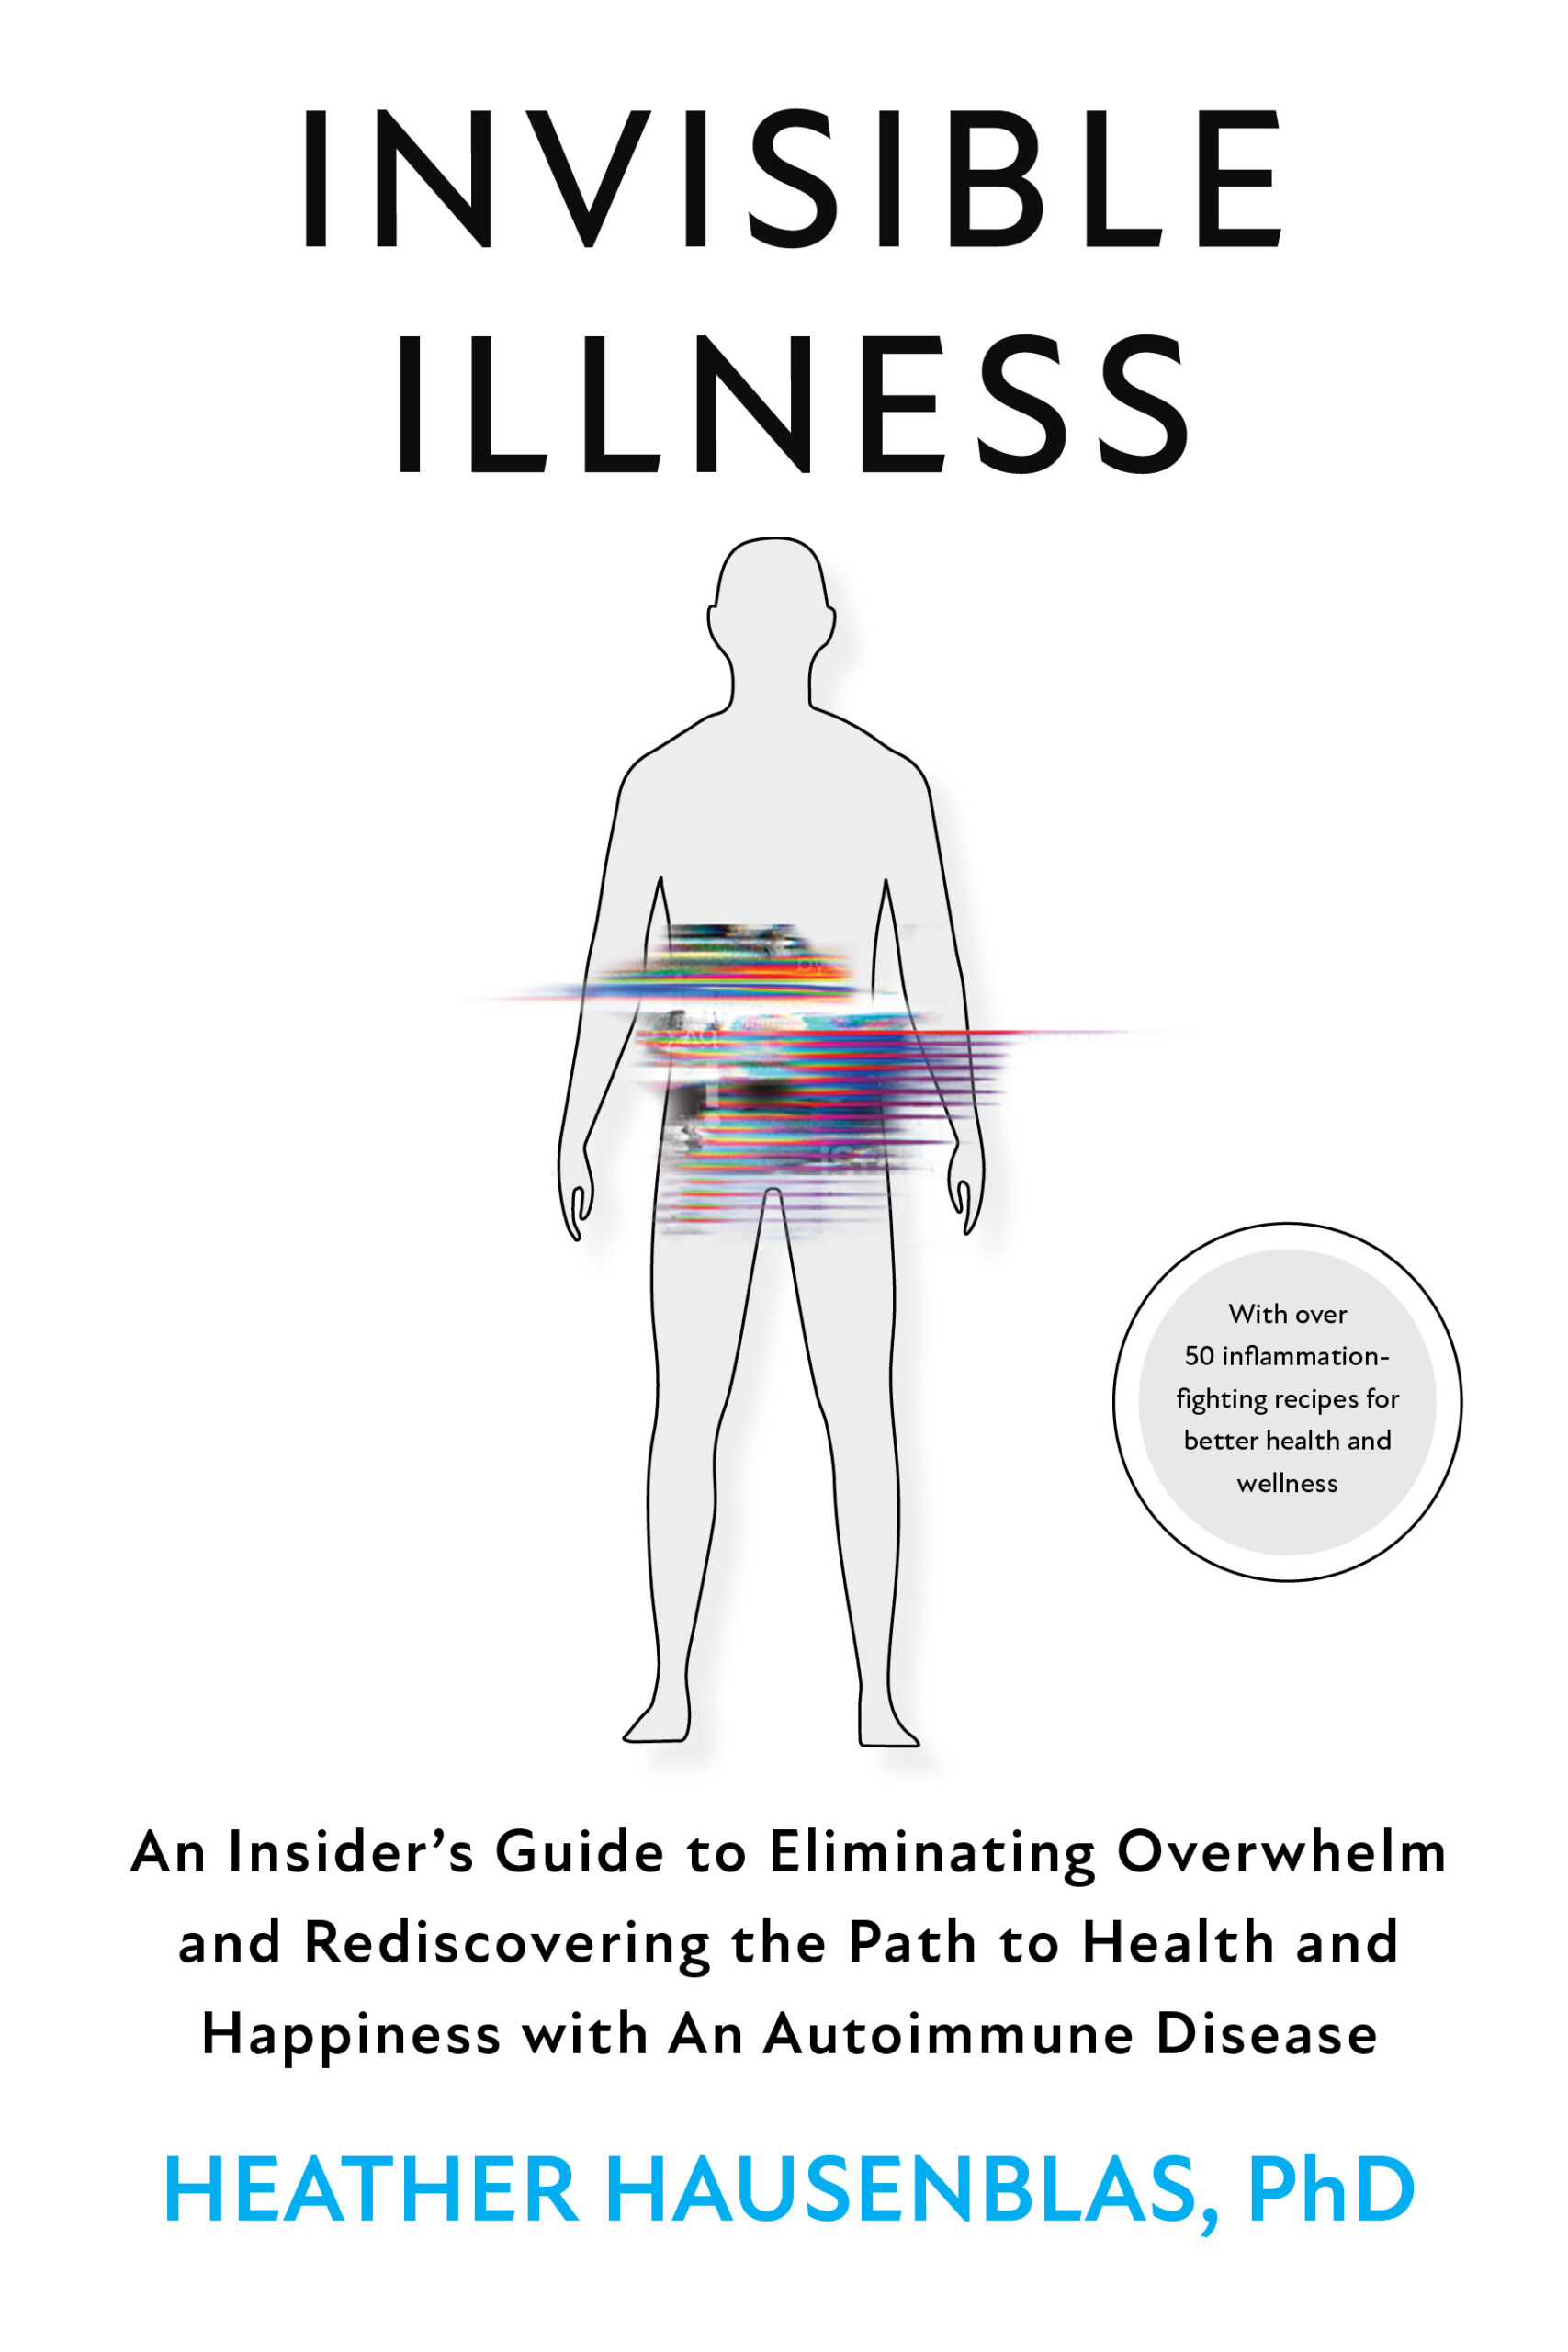 FREE: Invisible Illness: An Insider’s Guide to Eliminating Overwhelm and Rediscovering the Path to Health and Happiness with an Autoimmune Disease by Heather Hausenblas